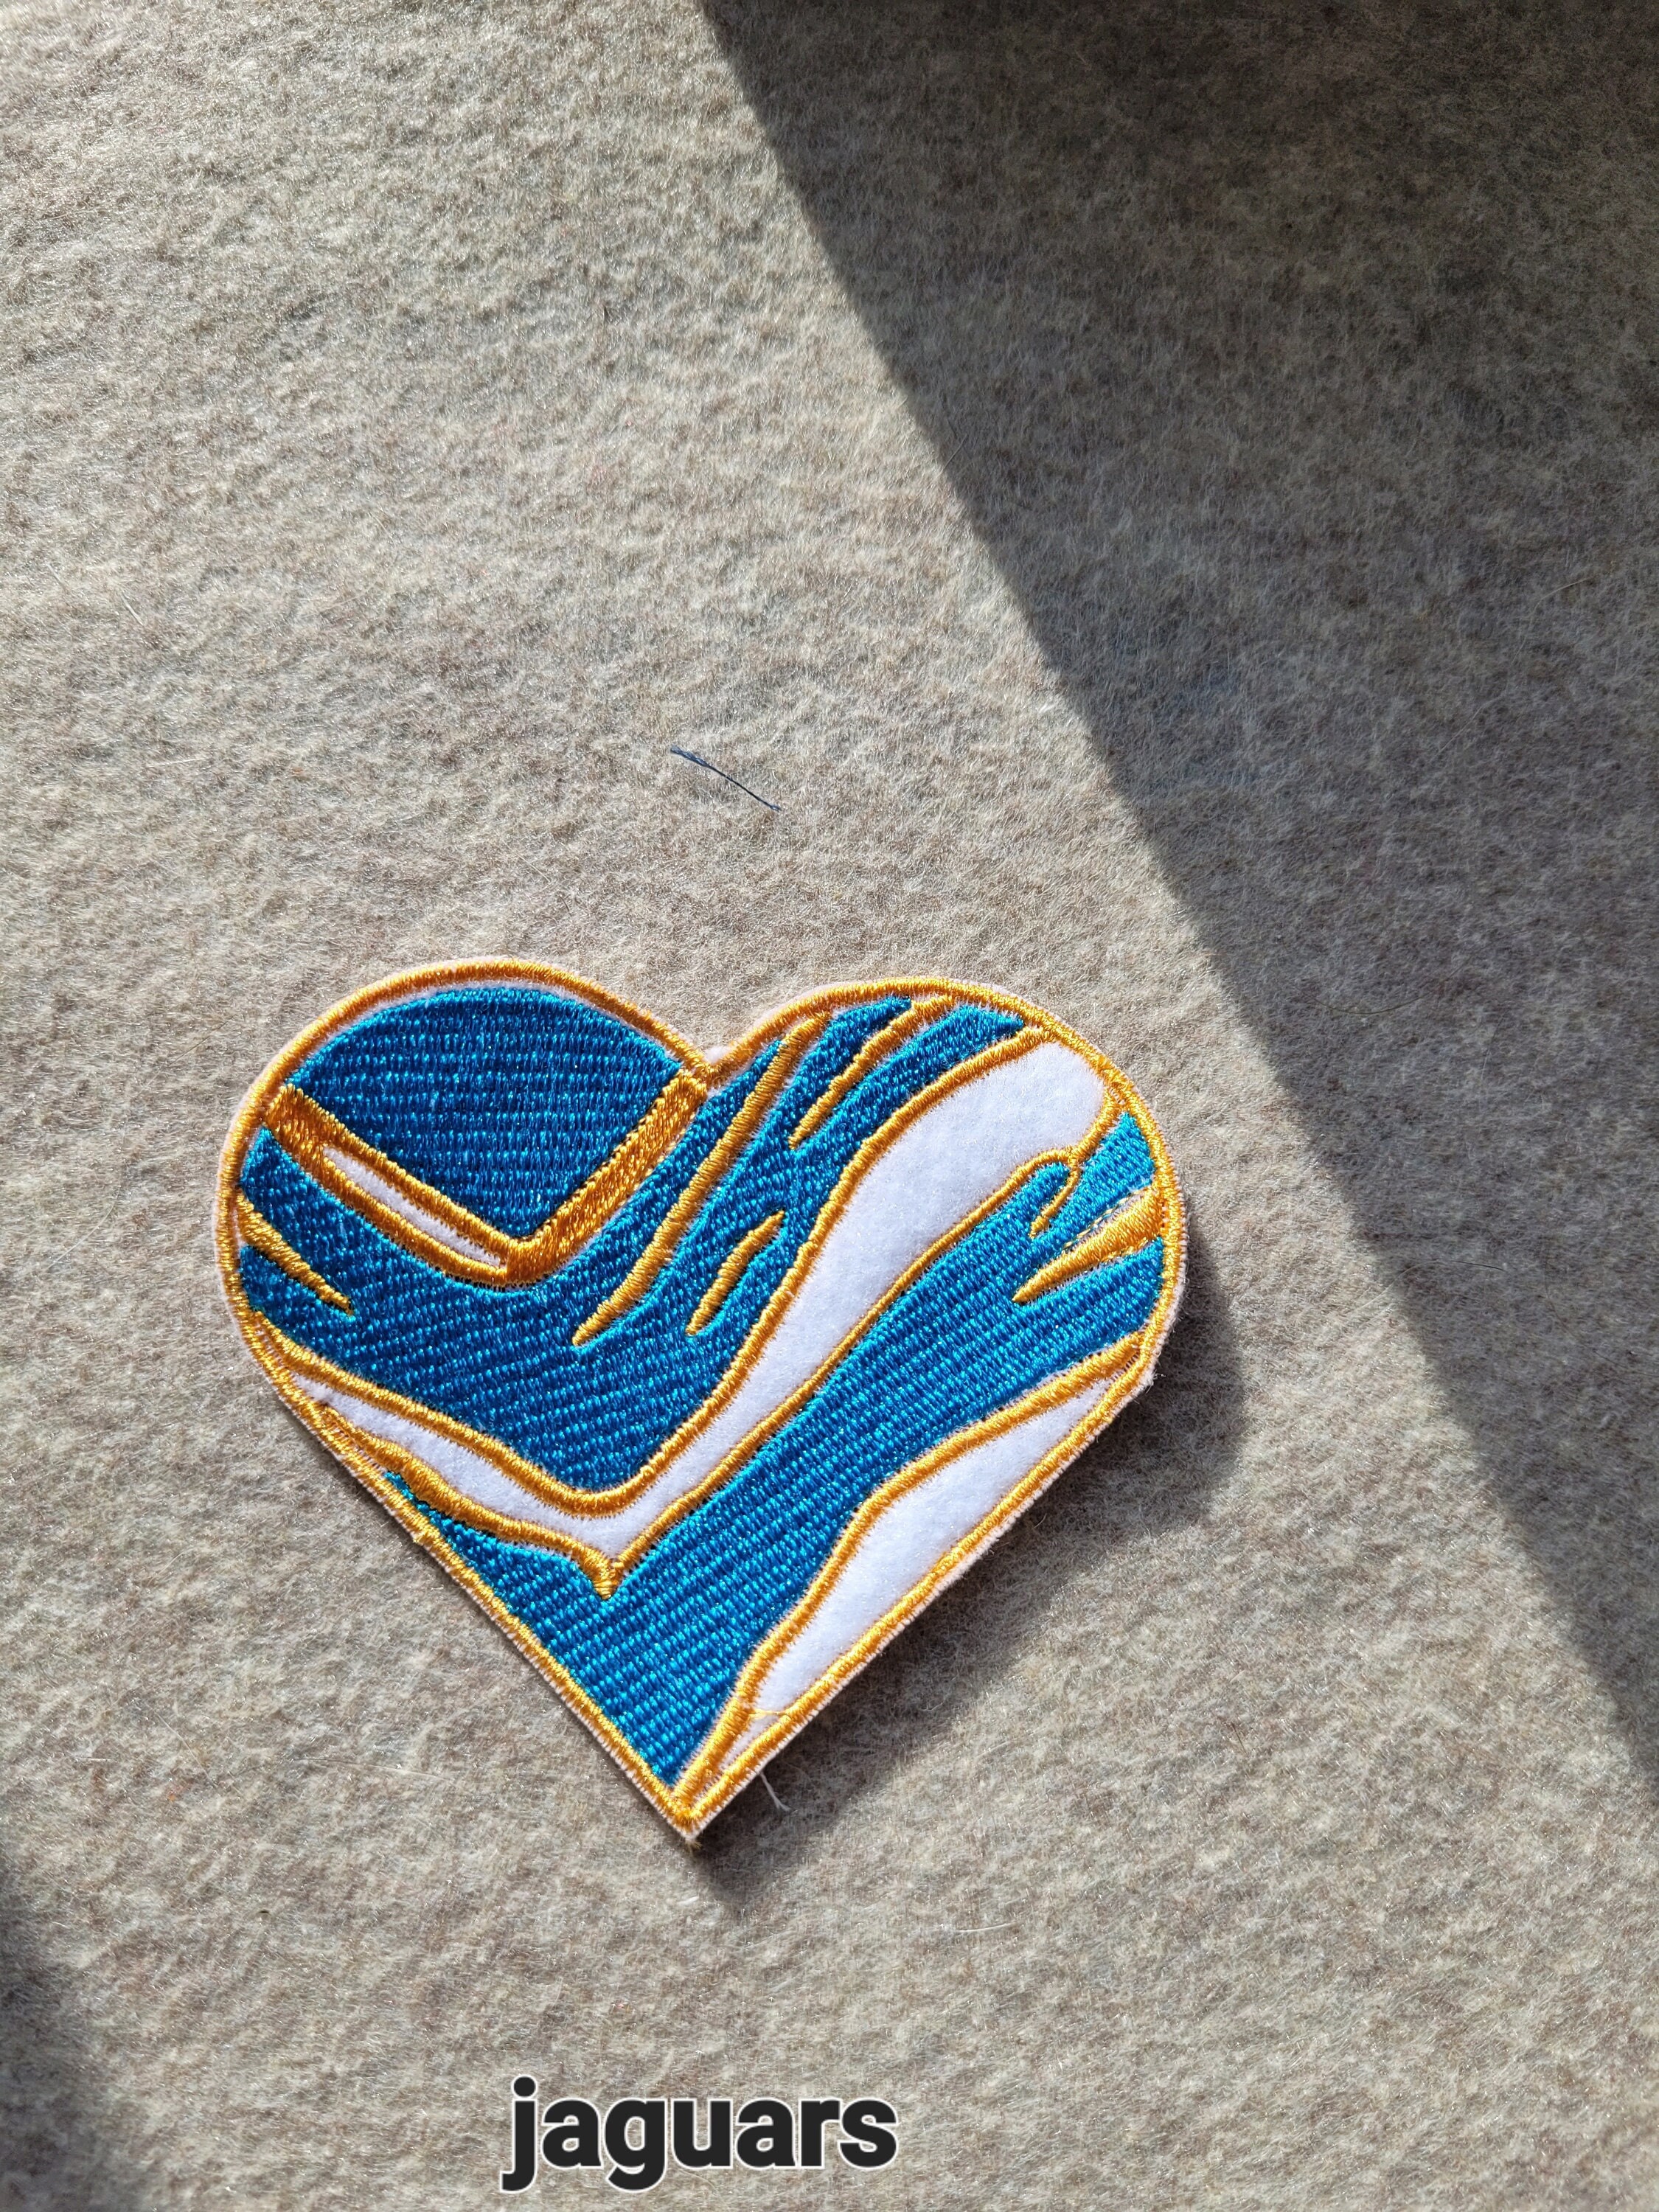 Jacksonville Football Striped Heart Patch 2 Sizes Available 